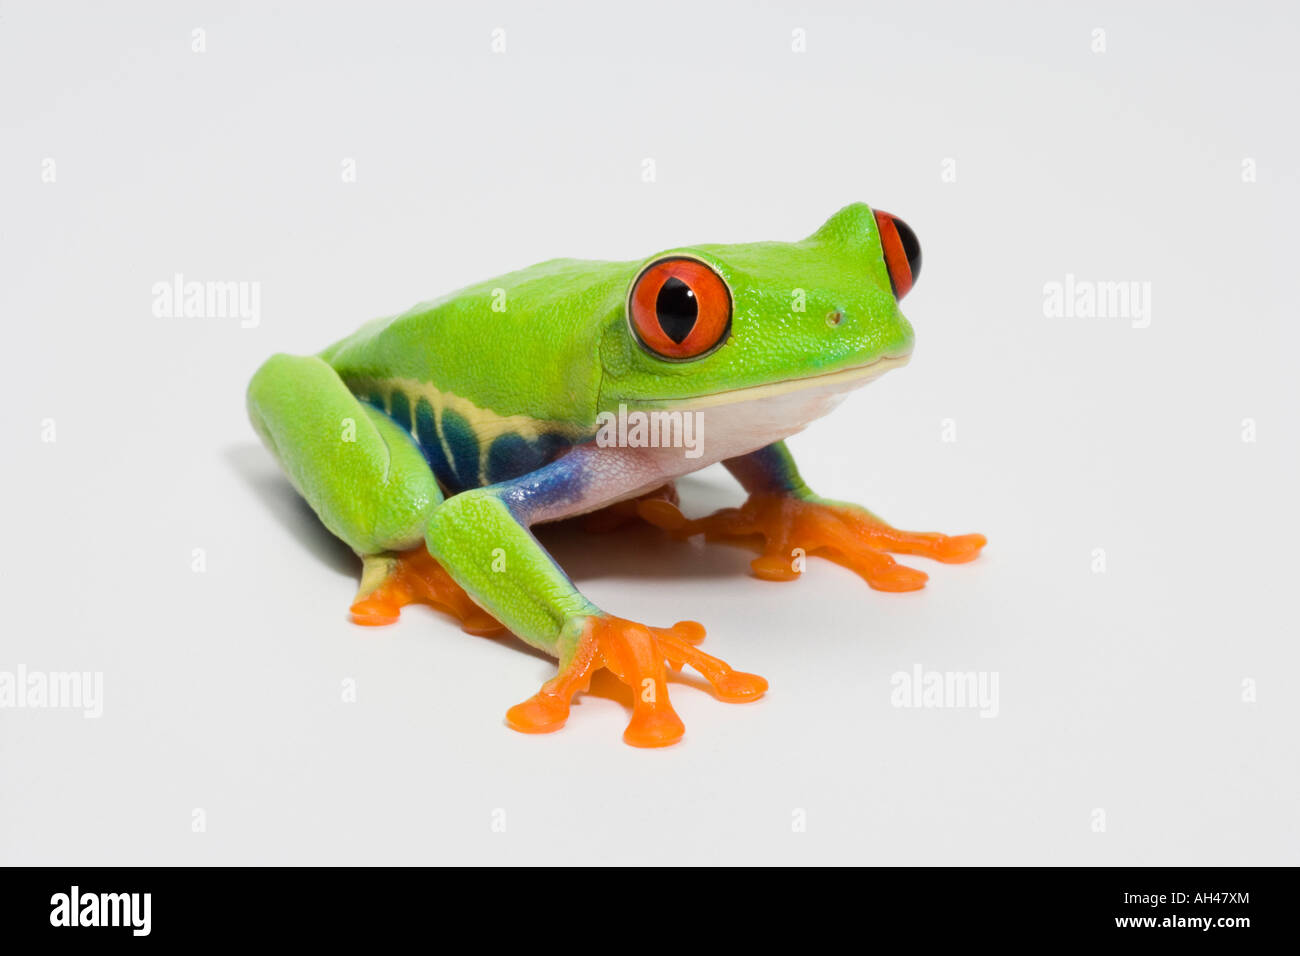 Red eyed tree frog 2 Banque D'Images